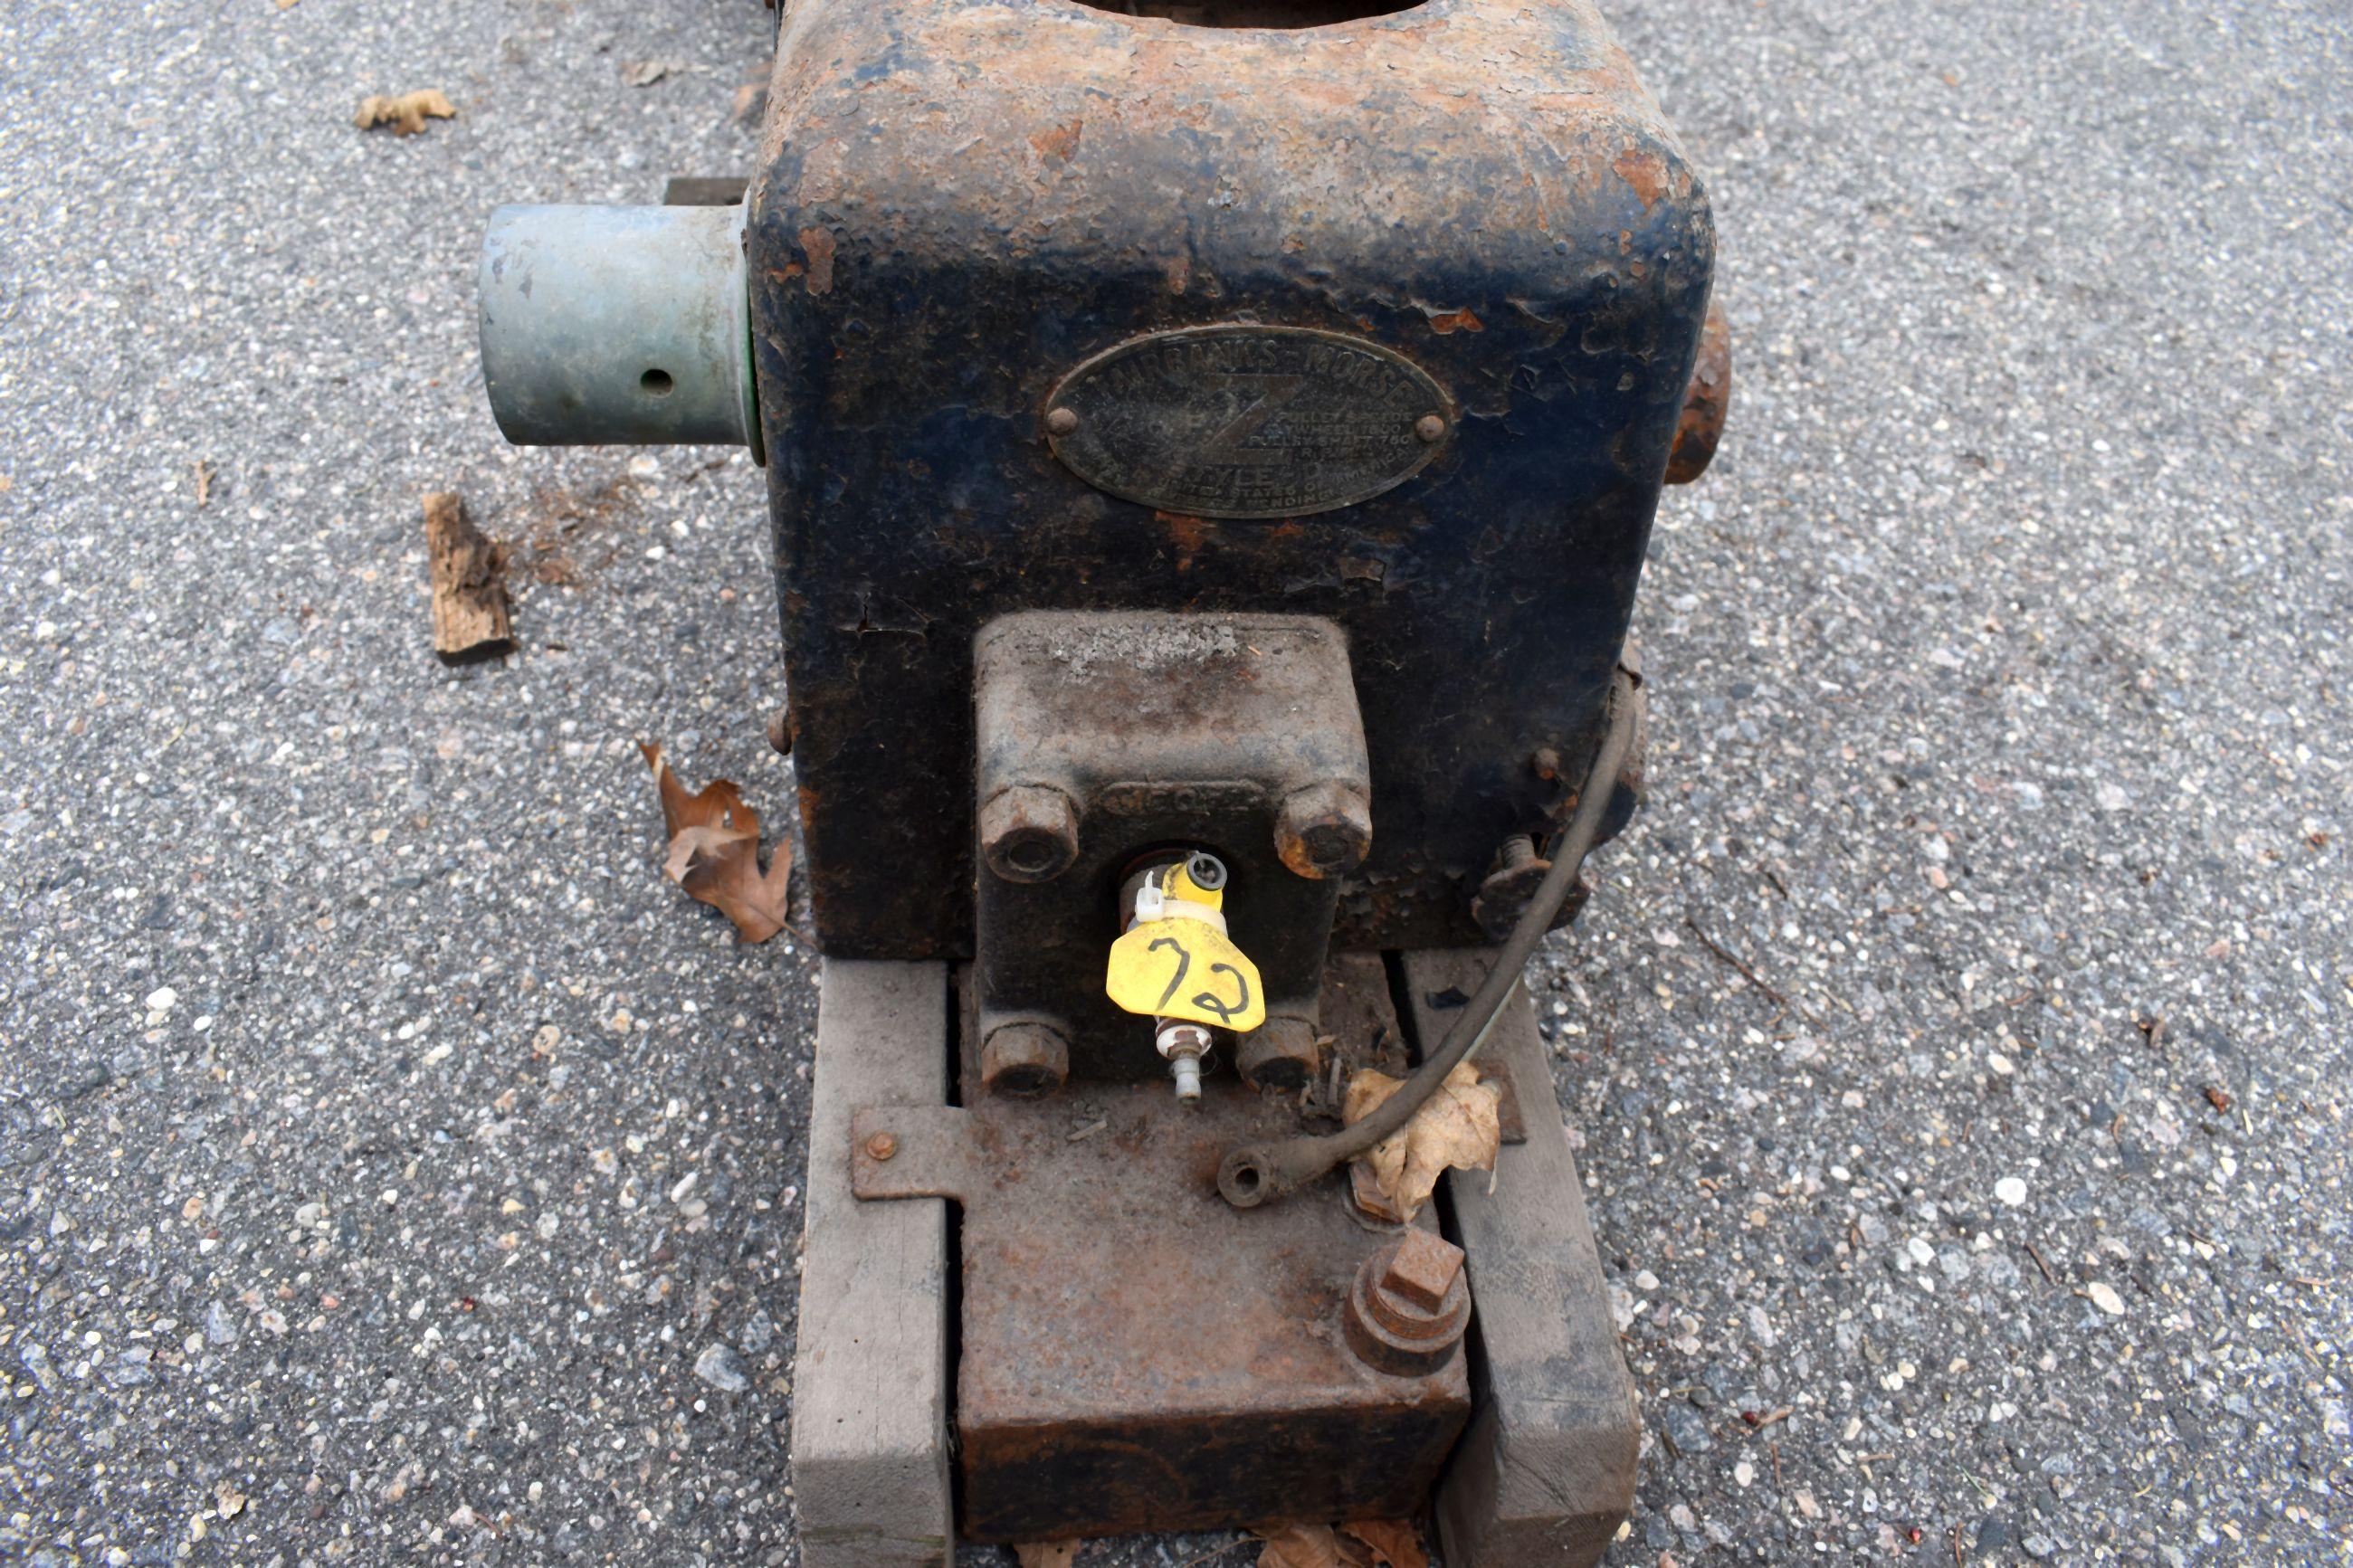 Fairbanks Morse Z 1.5HP Gas Engine, Style D, With Magneto,